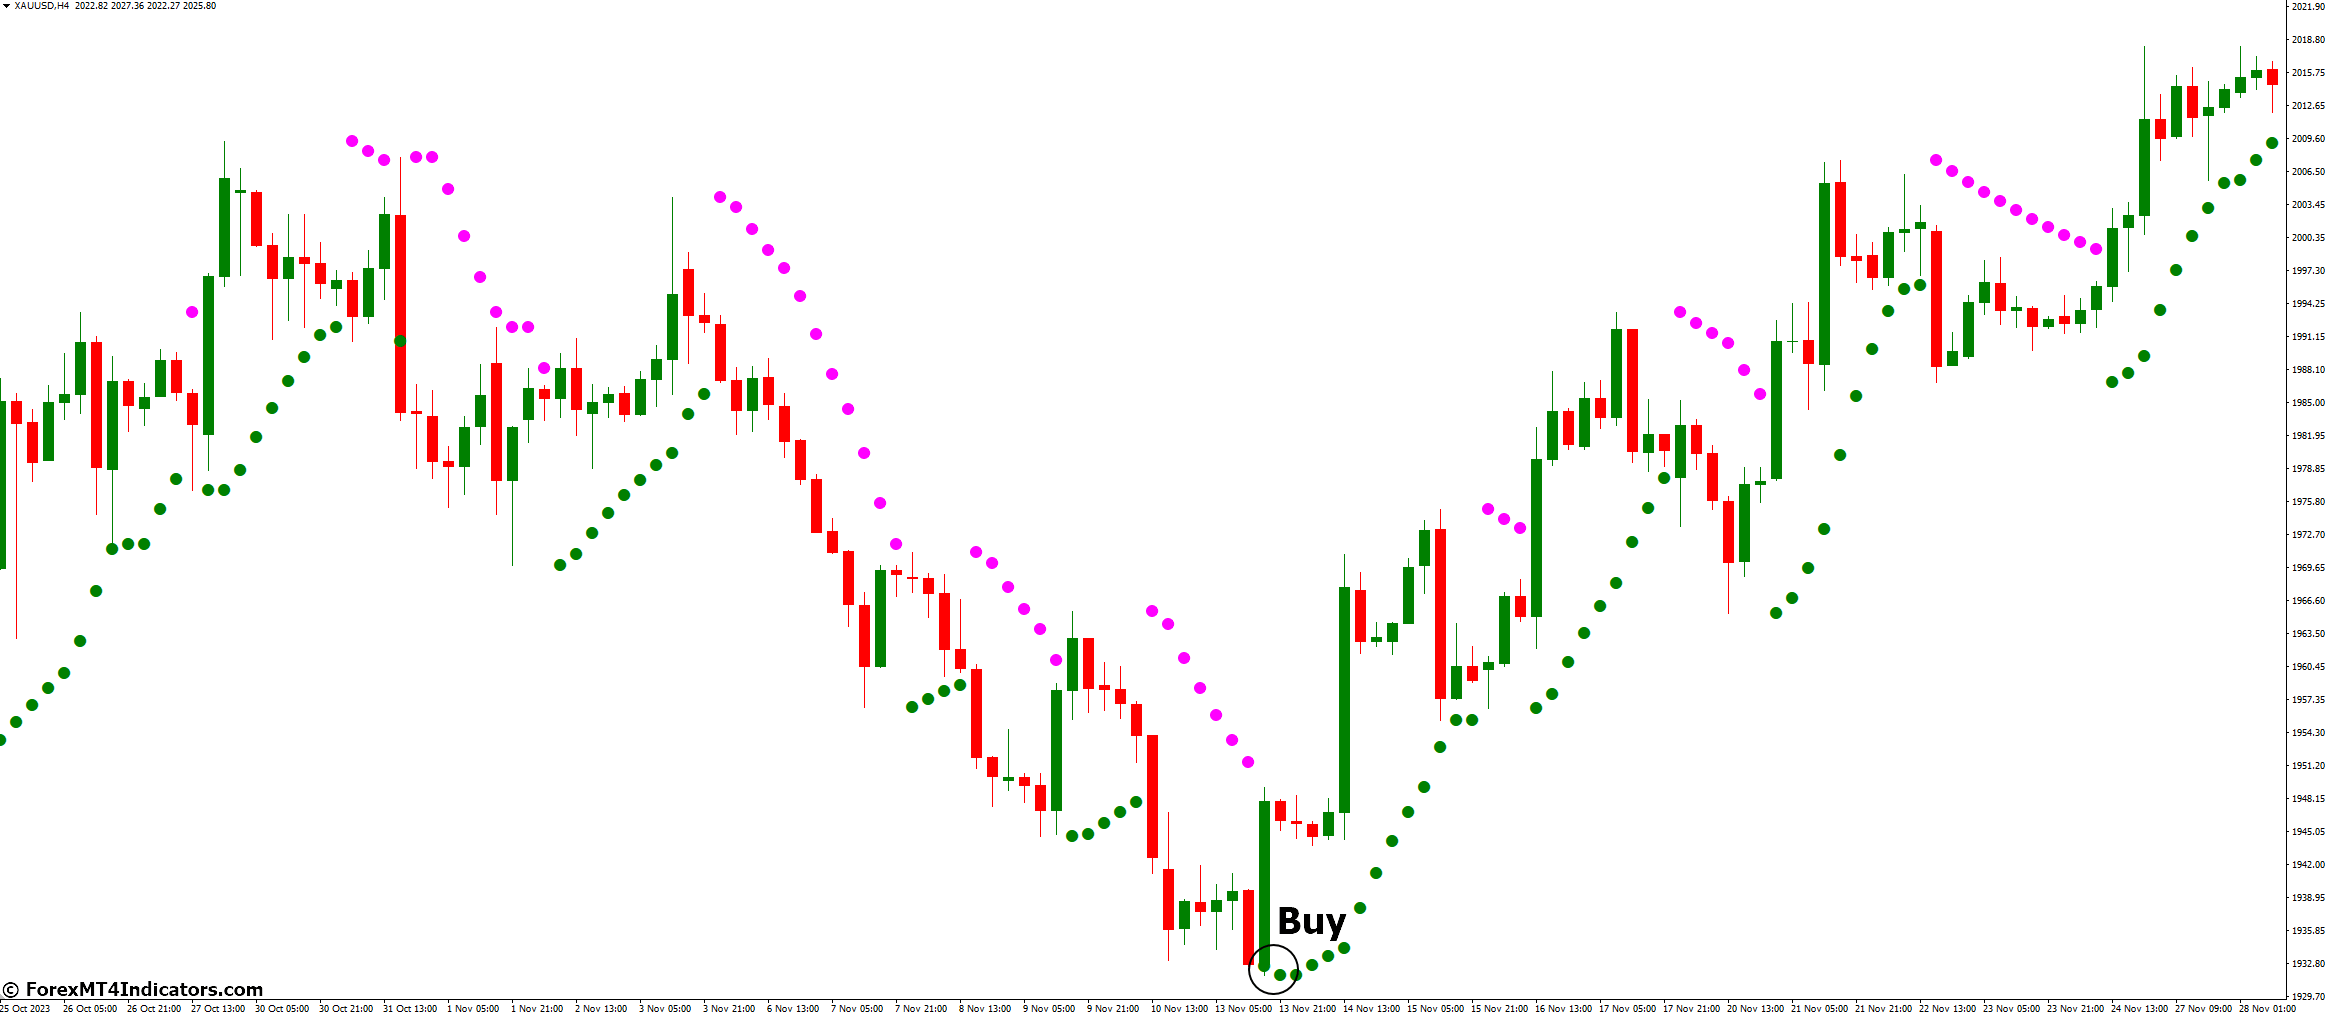 How to Trade with SAR Color Indicator - Buy Entry